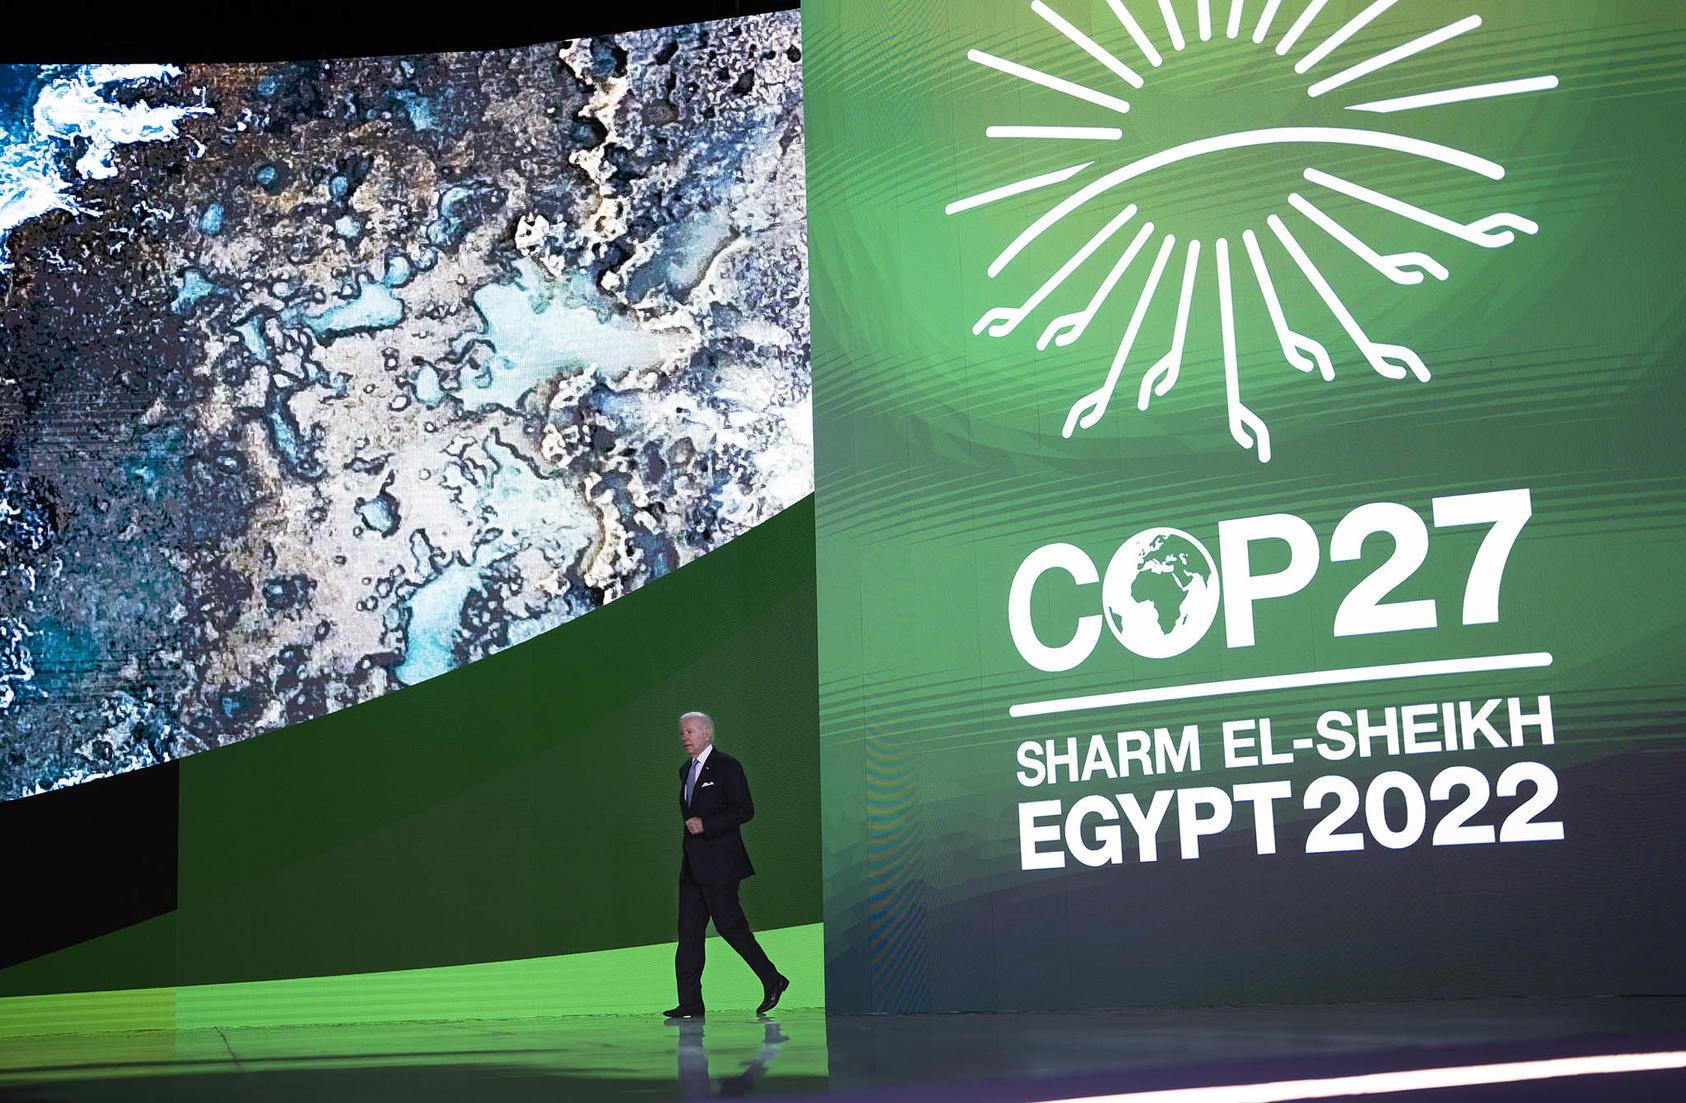 President Joe Biden takes the stage to deliver remarks during COP27 in Sharm El-Sheikh, Egypt. November 11, 2022. (Doug Mills/The New York Times)